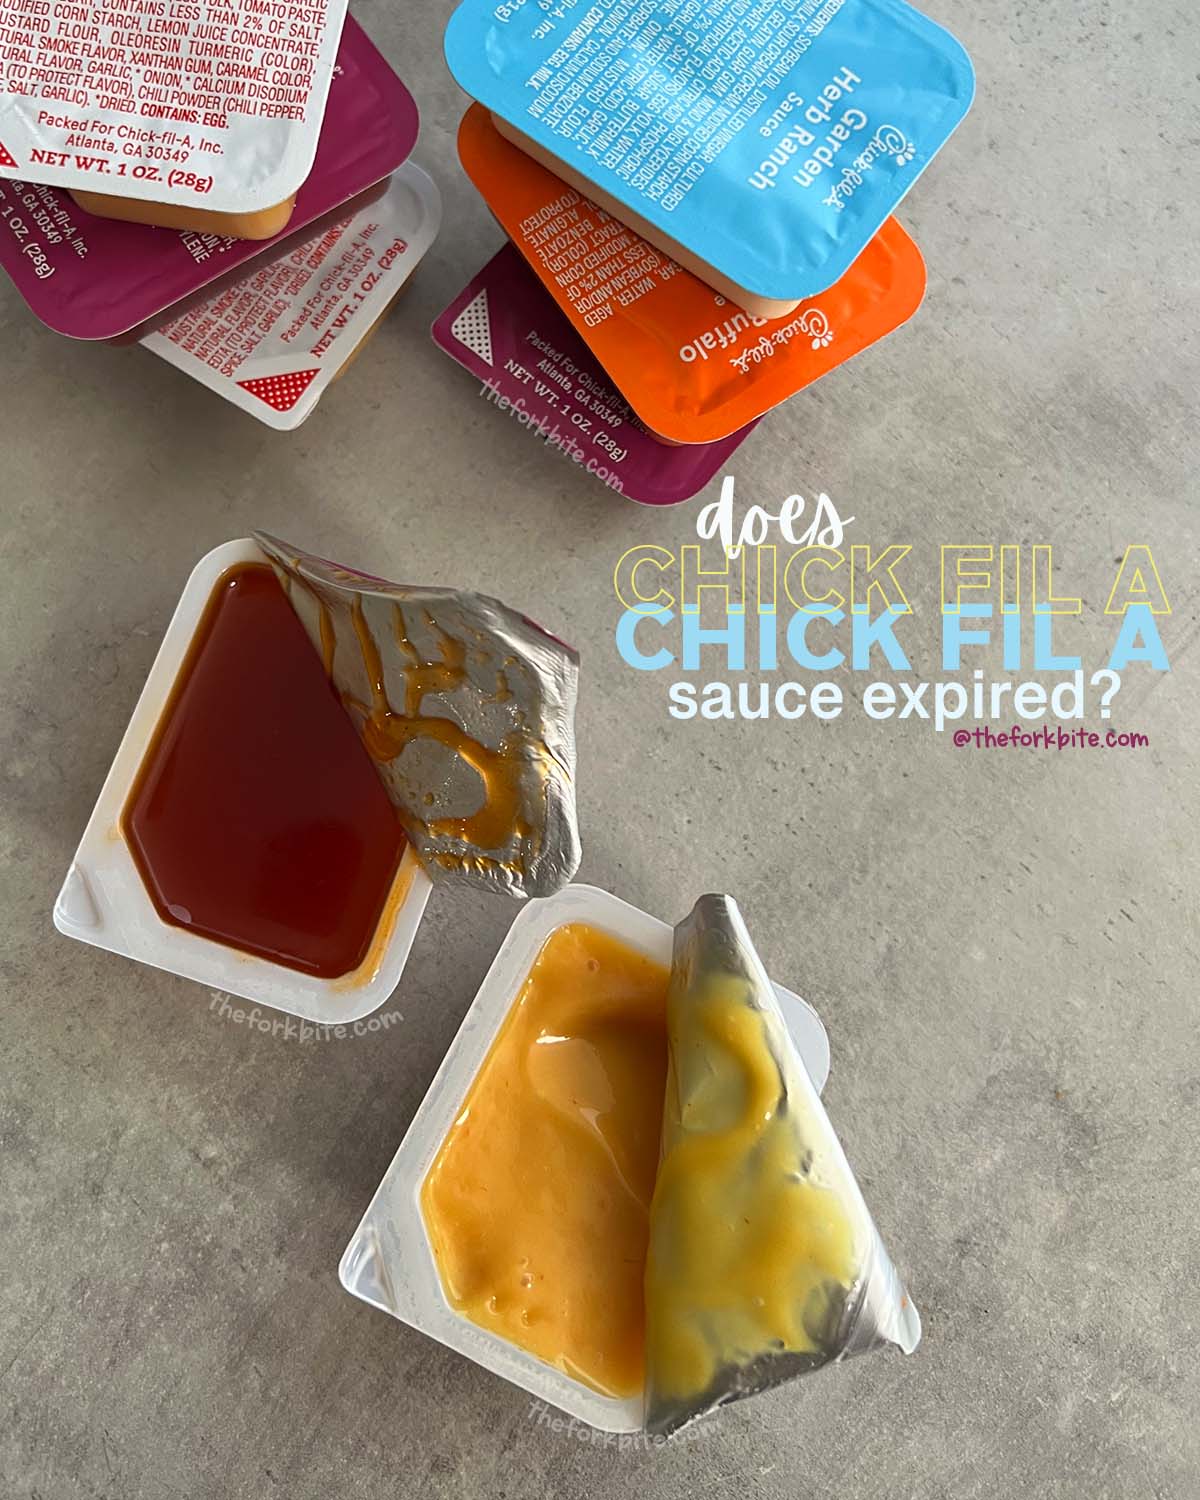 Yes, the sauce from Chick-fil-A does – indeed – expire. The time it lasts depends heavily upon how the sauce is packaged.